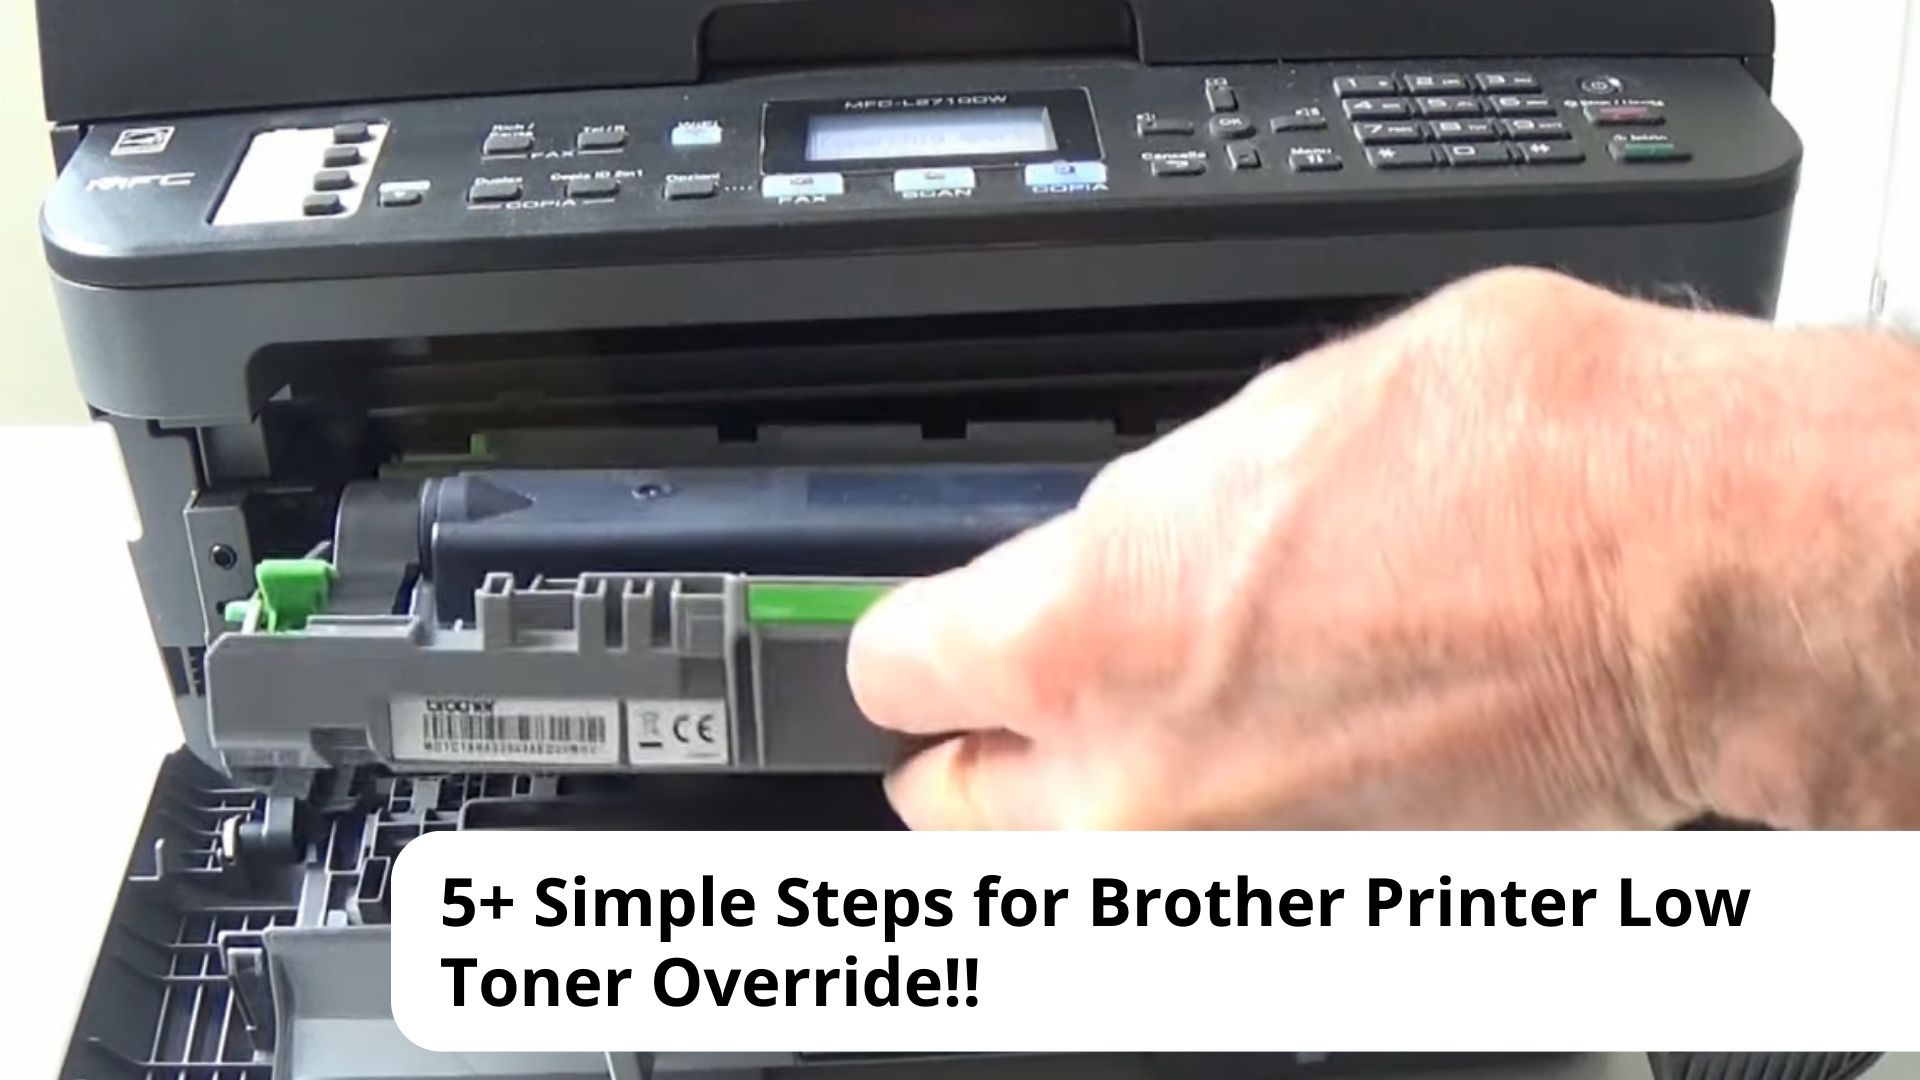 5+ Simple Steps for Brother Printer Low Toner Override!!